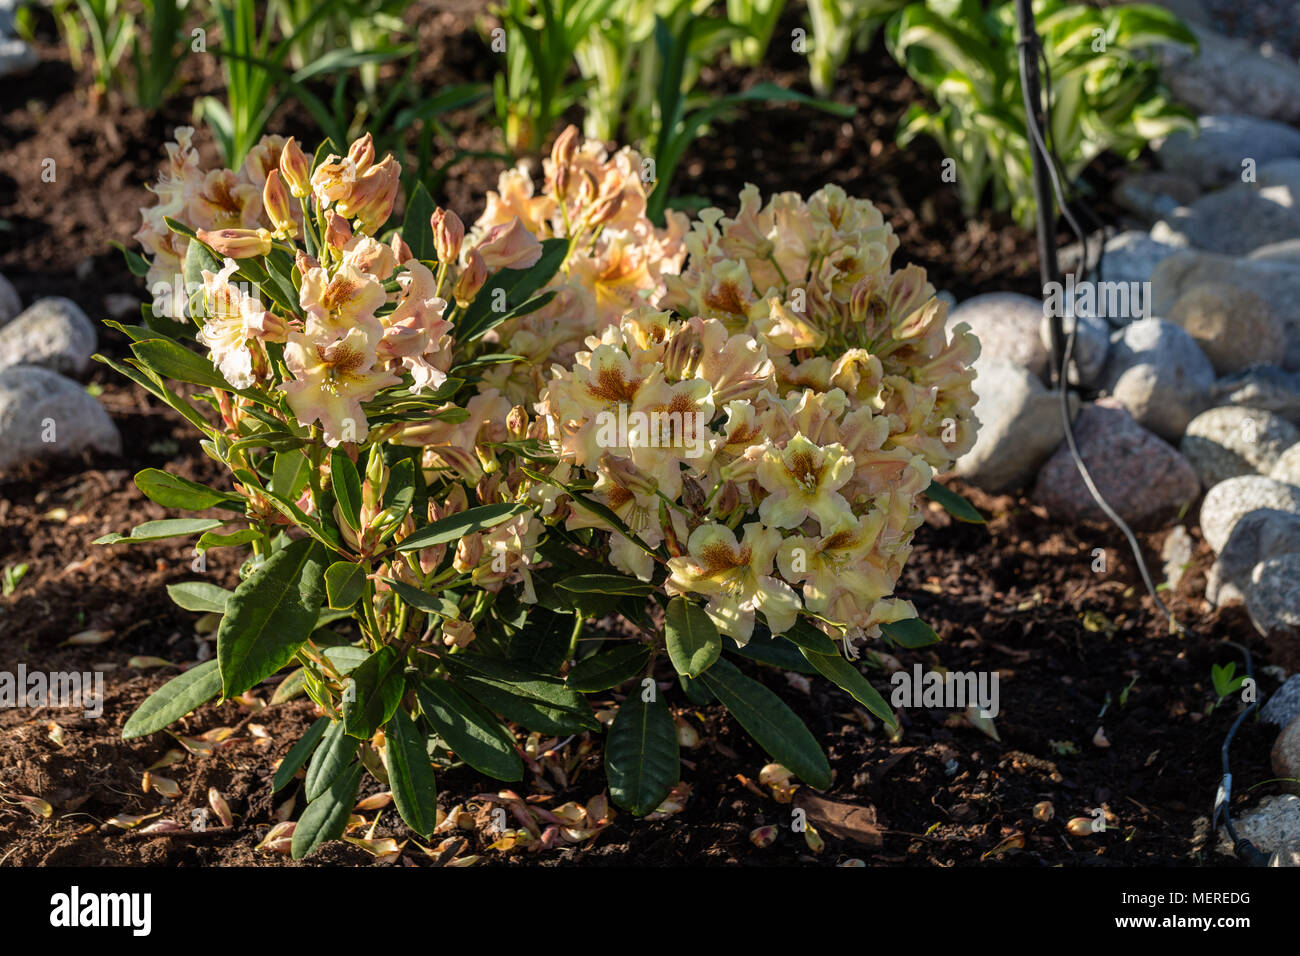 'Elsie Straver' Rhododendron, Parkrhododendron (Rhododendron catawbiense) Stock Photo